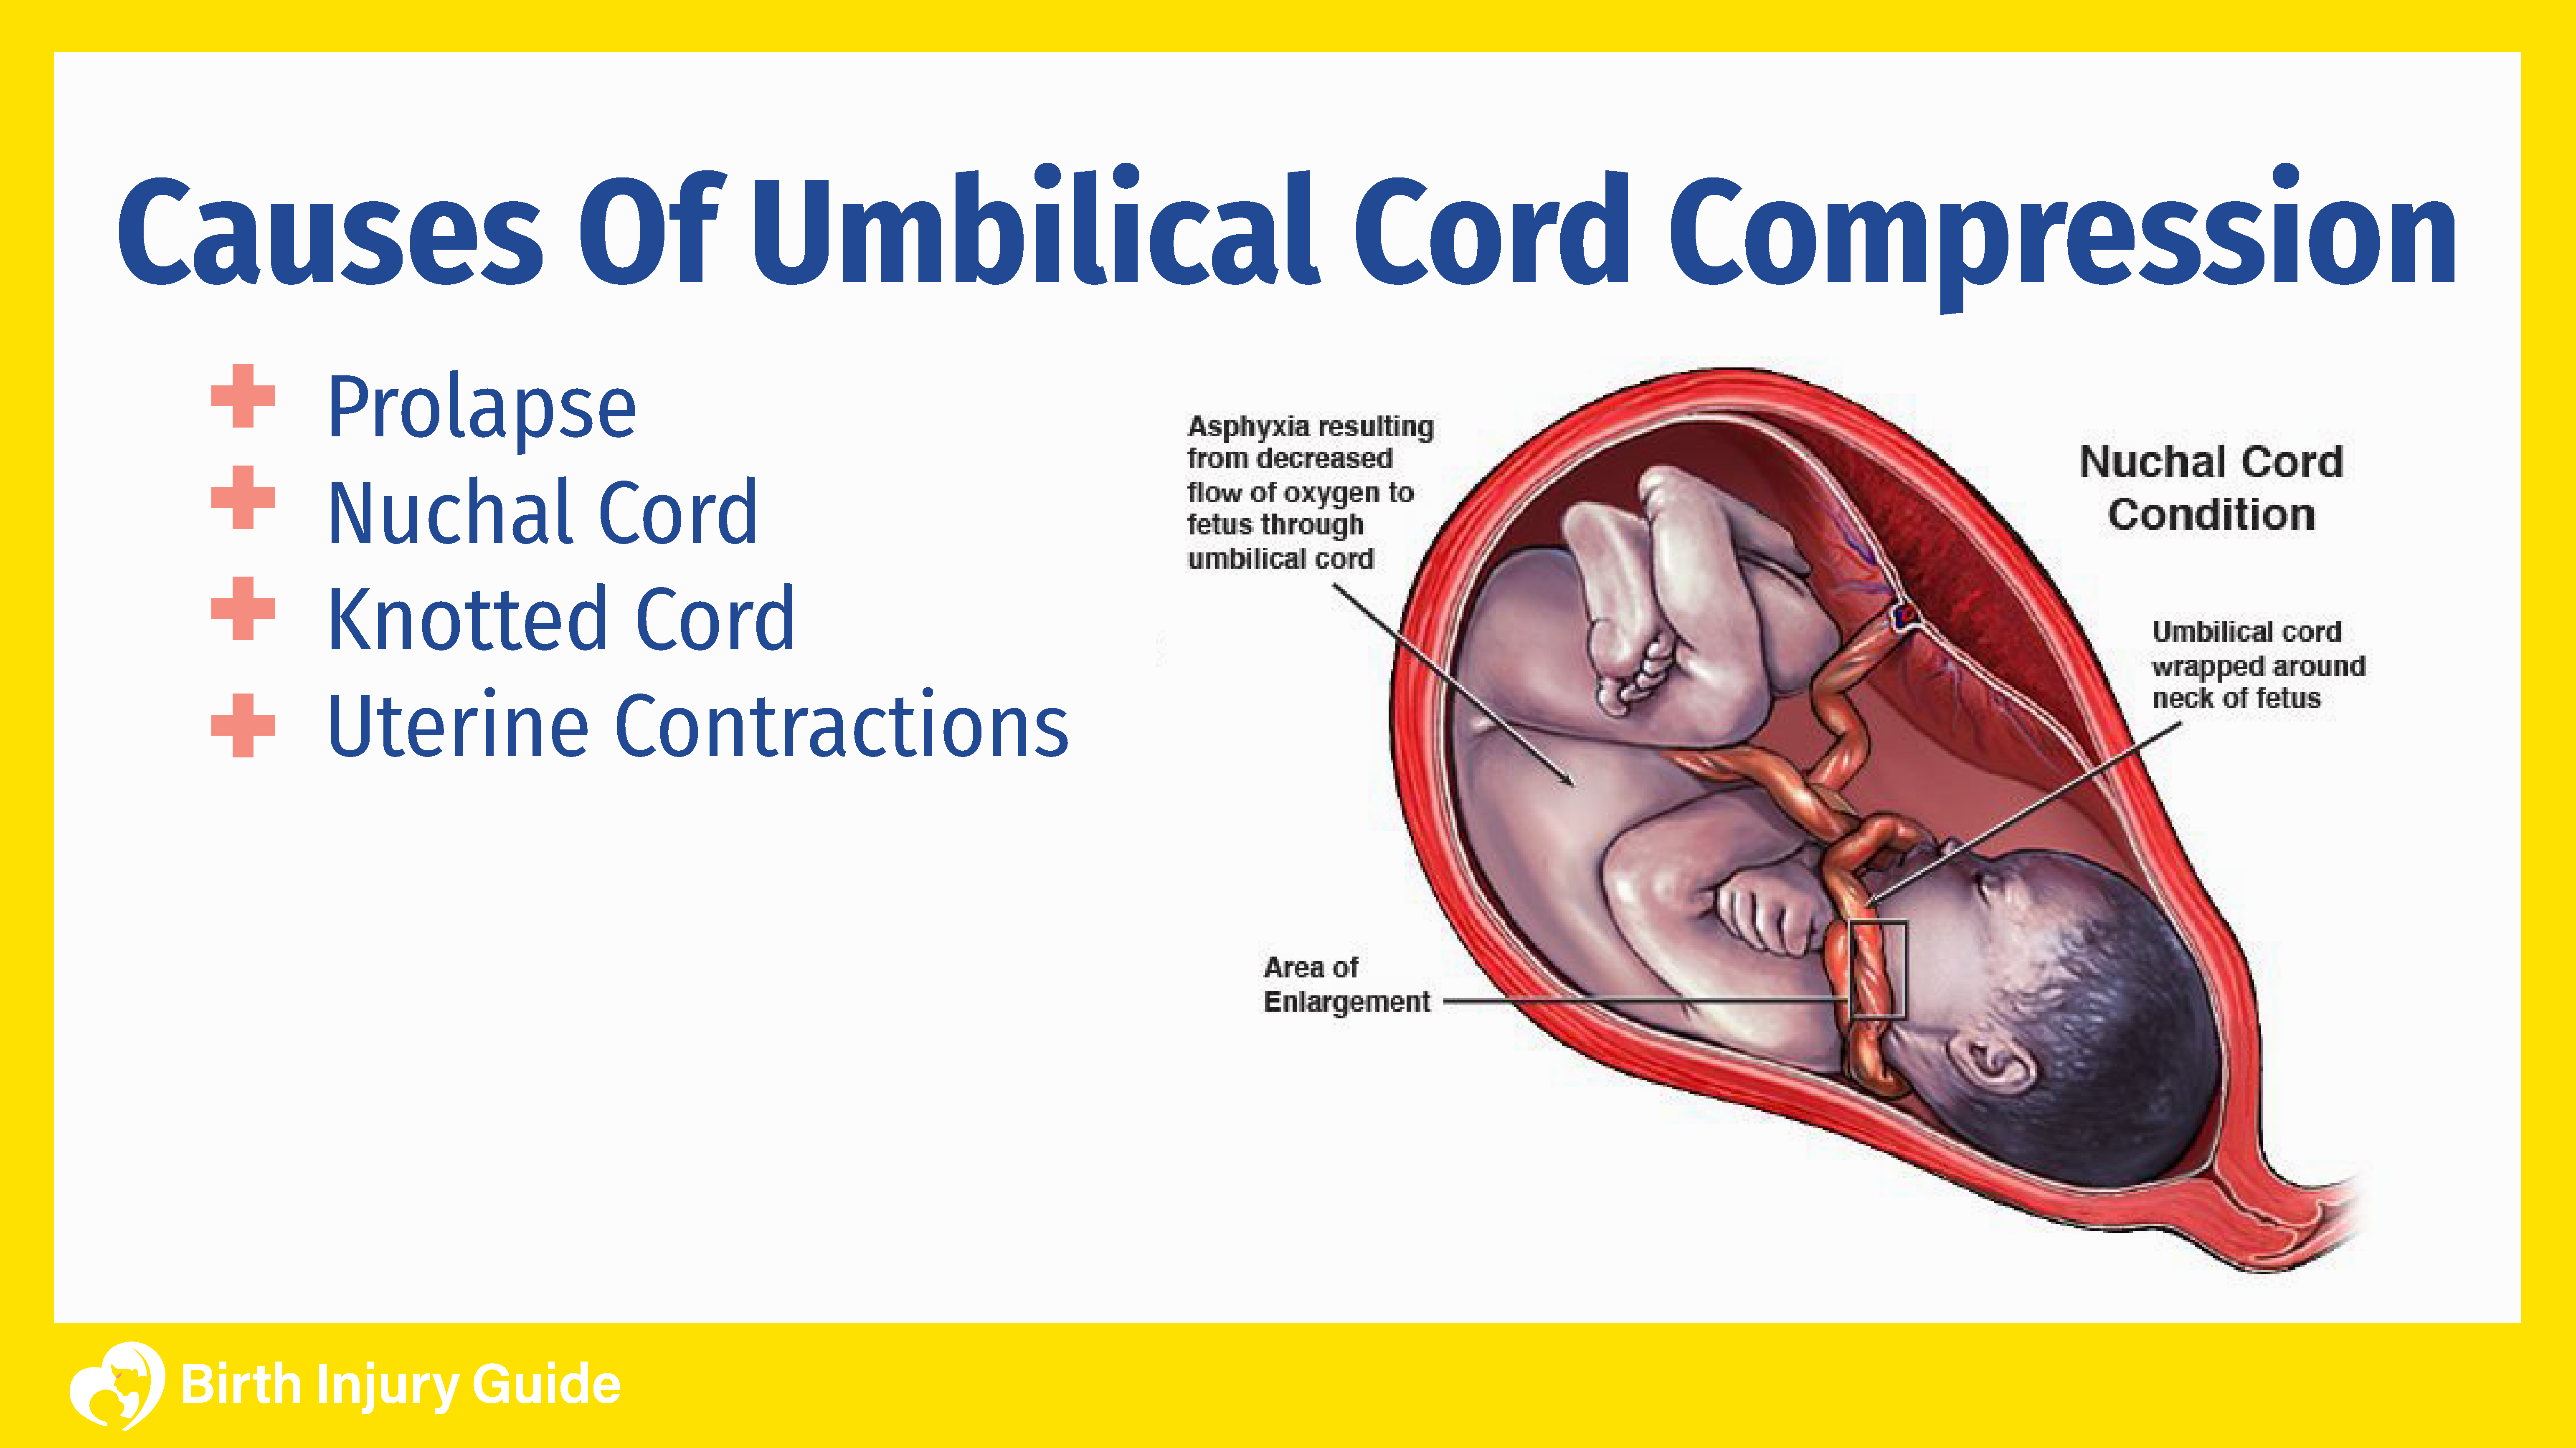 What Are the Signs of Umbilical Cord Compression?